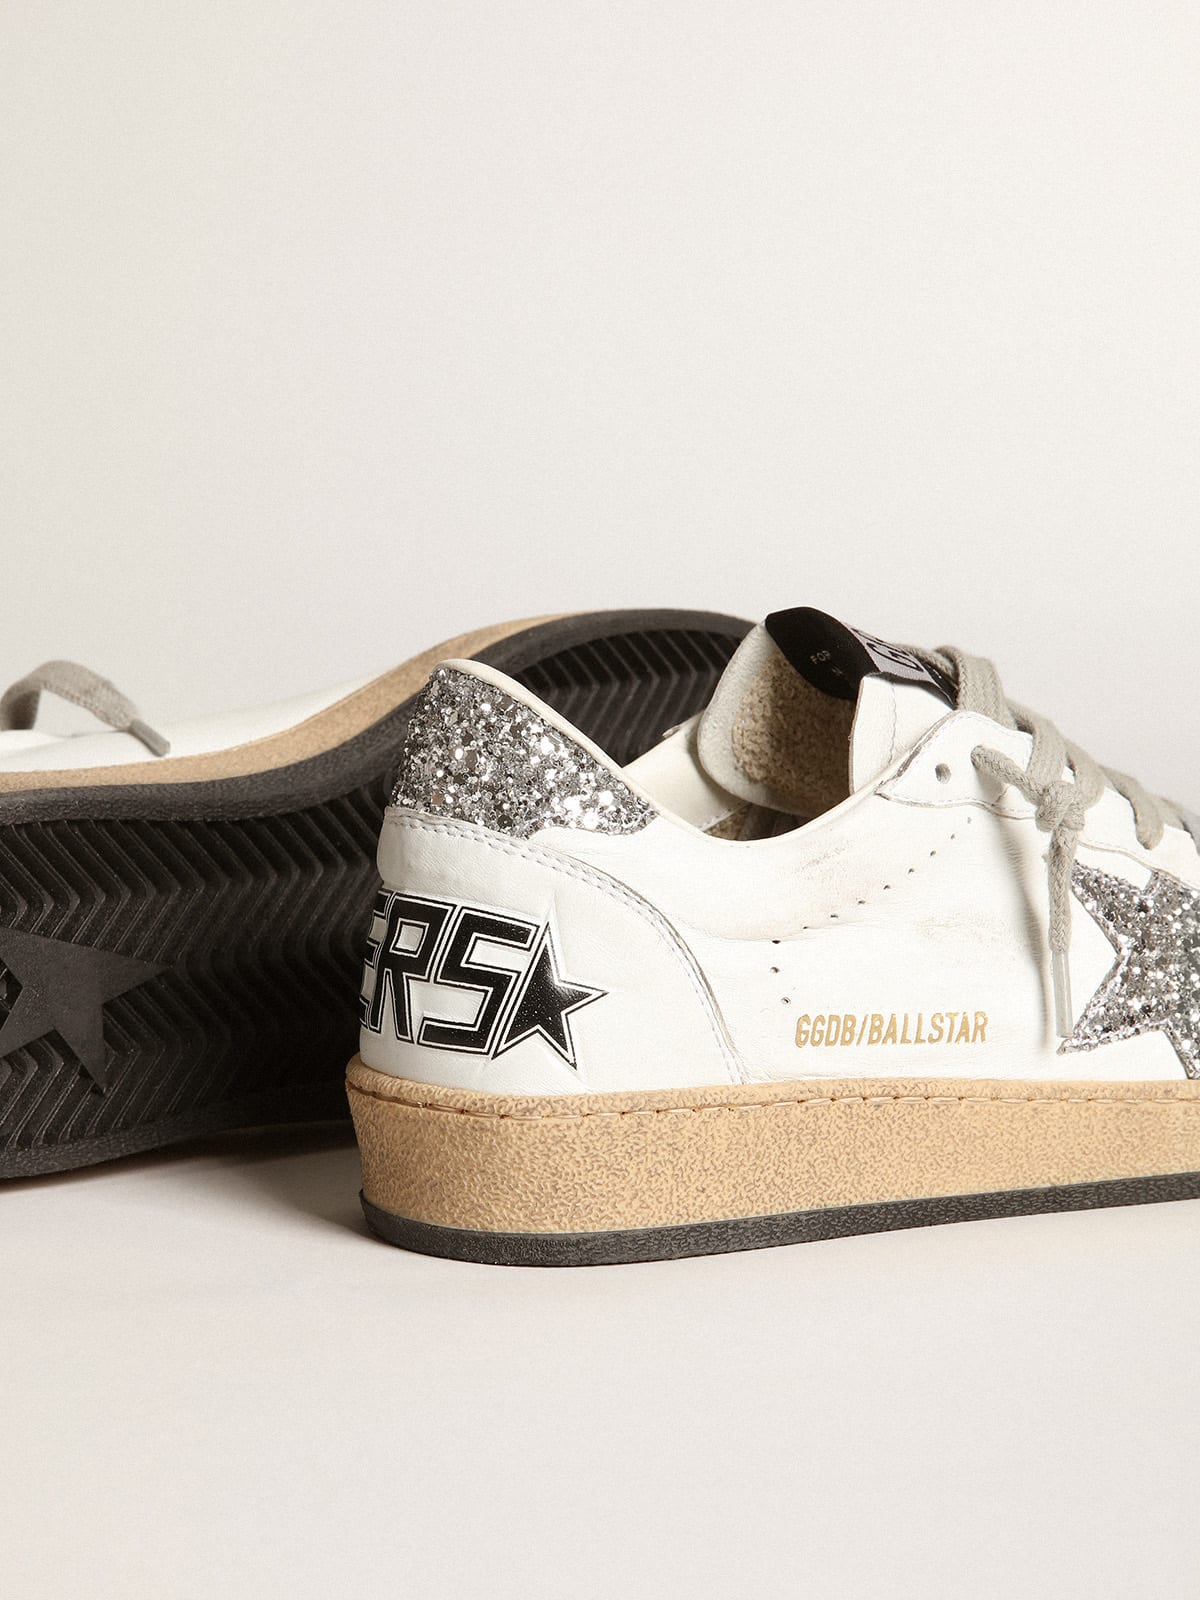 Golden Goose - Ball Star sneakers in white nappa leather with silver glitter star and heel tab in 